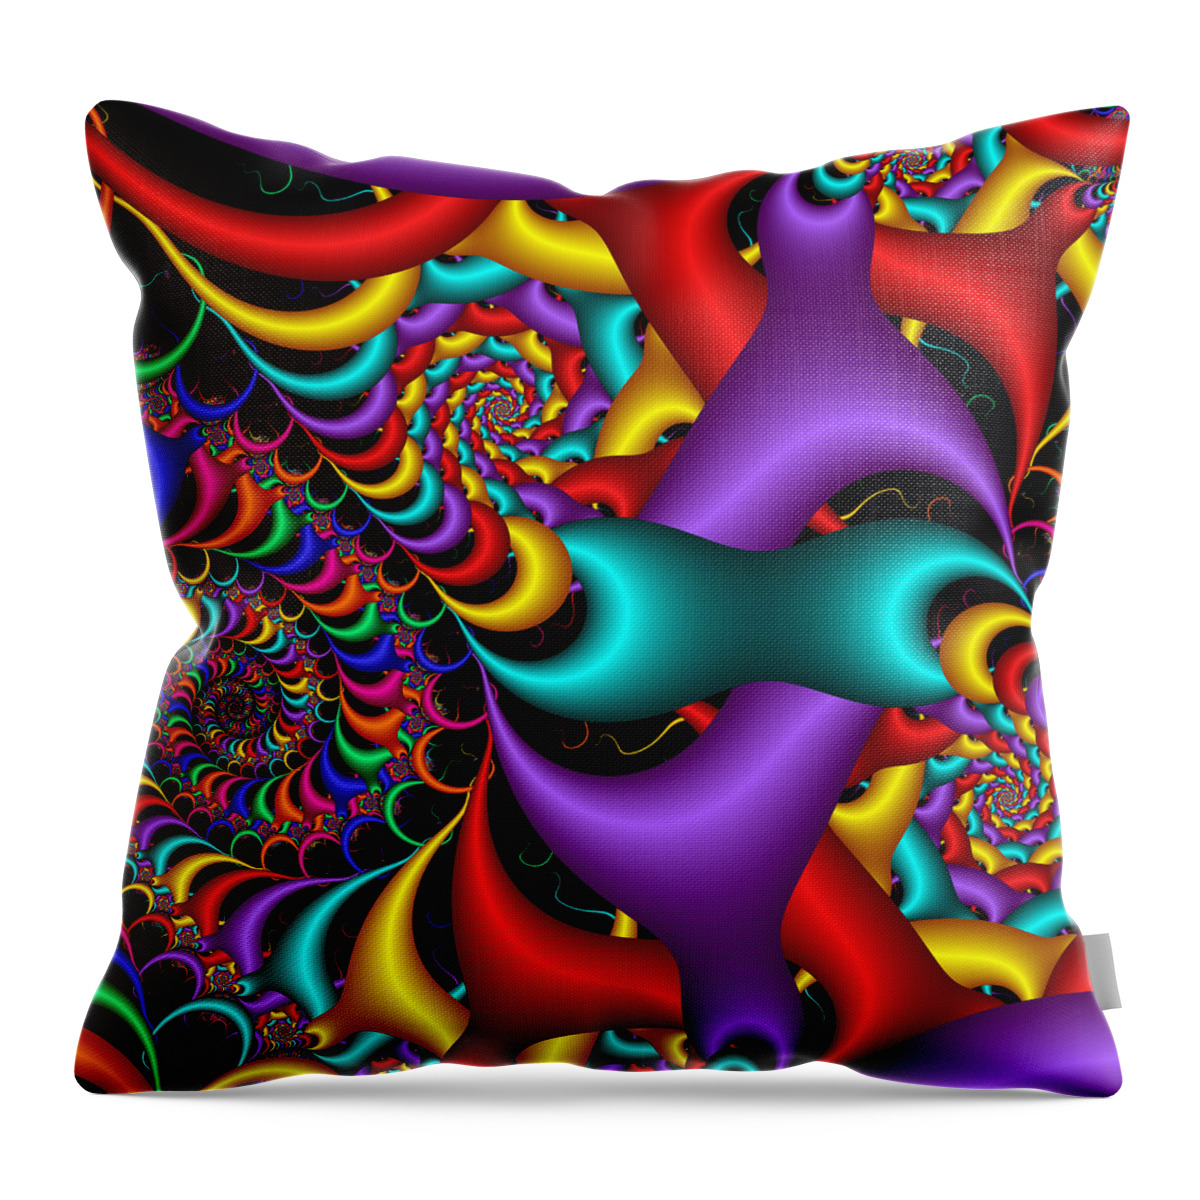 Fractal Throw Pillow featuring the digital art Colorful Chaos by Gabiw Art